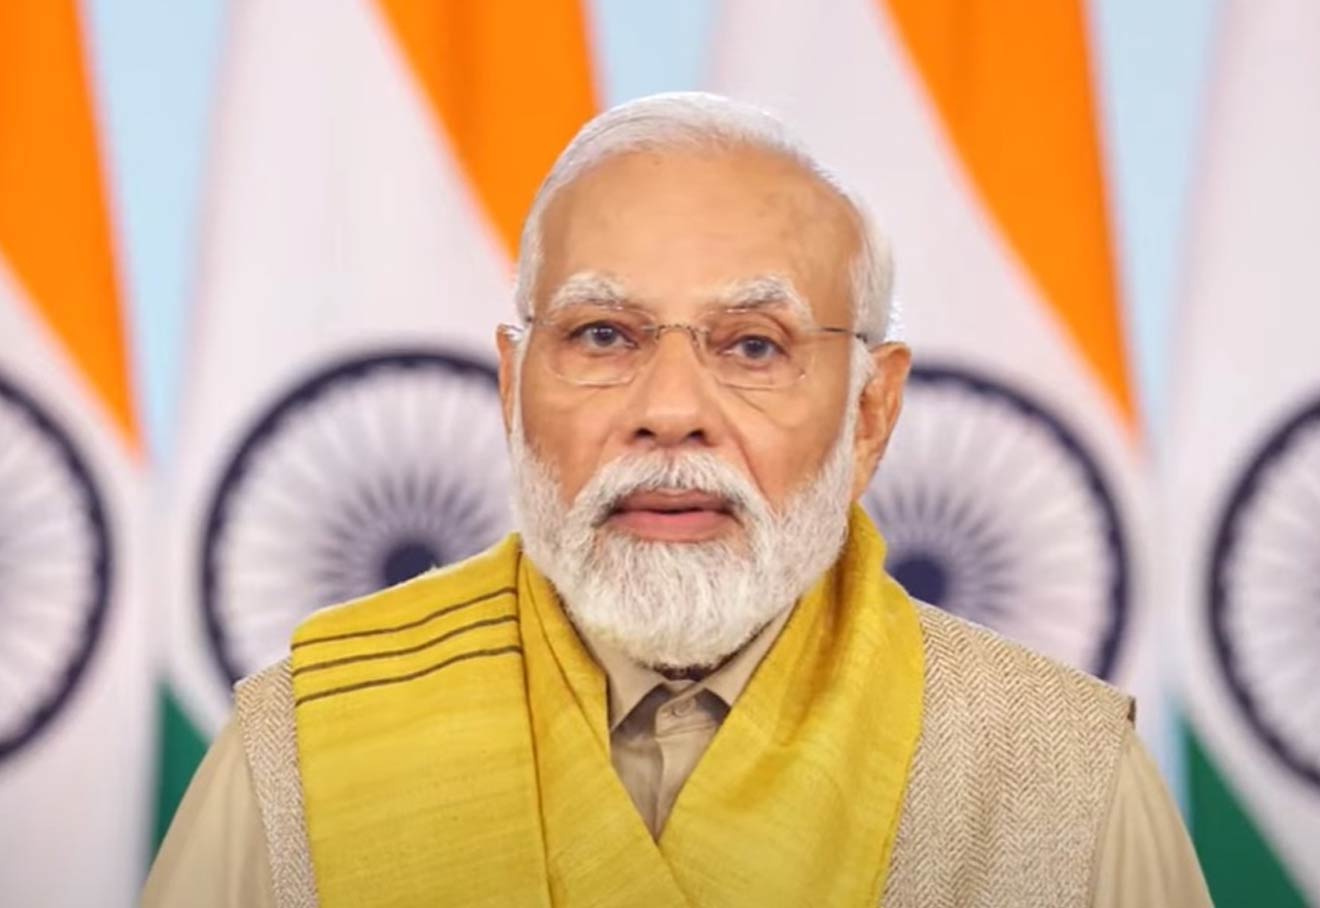 PM Modi To Lay Foundation Stone Of Multiple Development Projects Worth Rs 4200 Cr In Pithoragarh